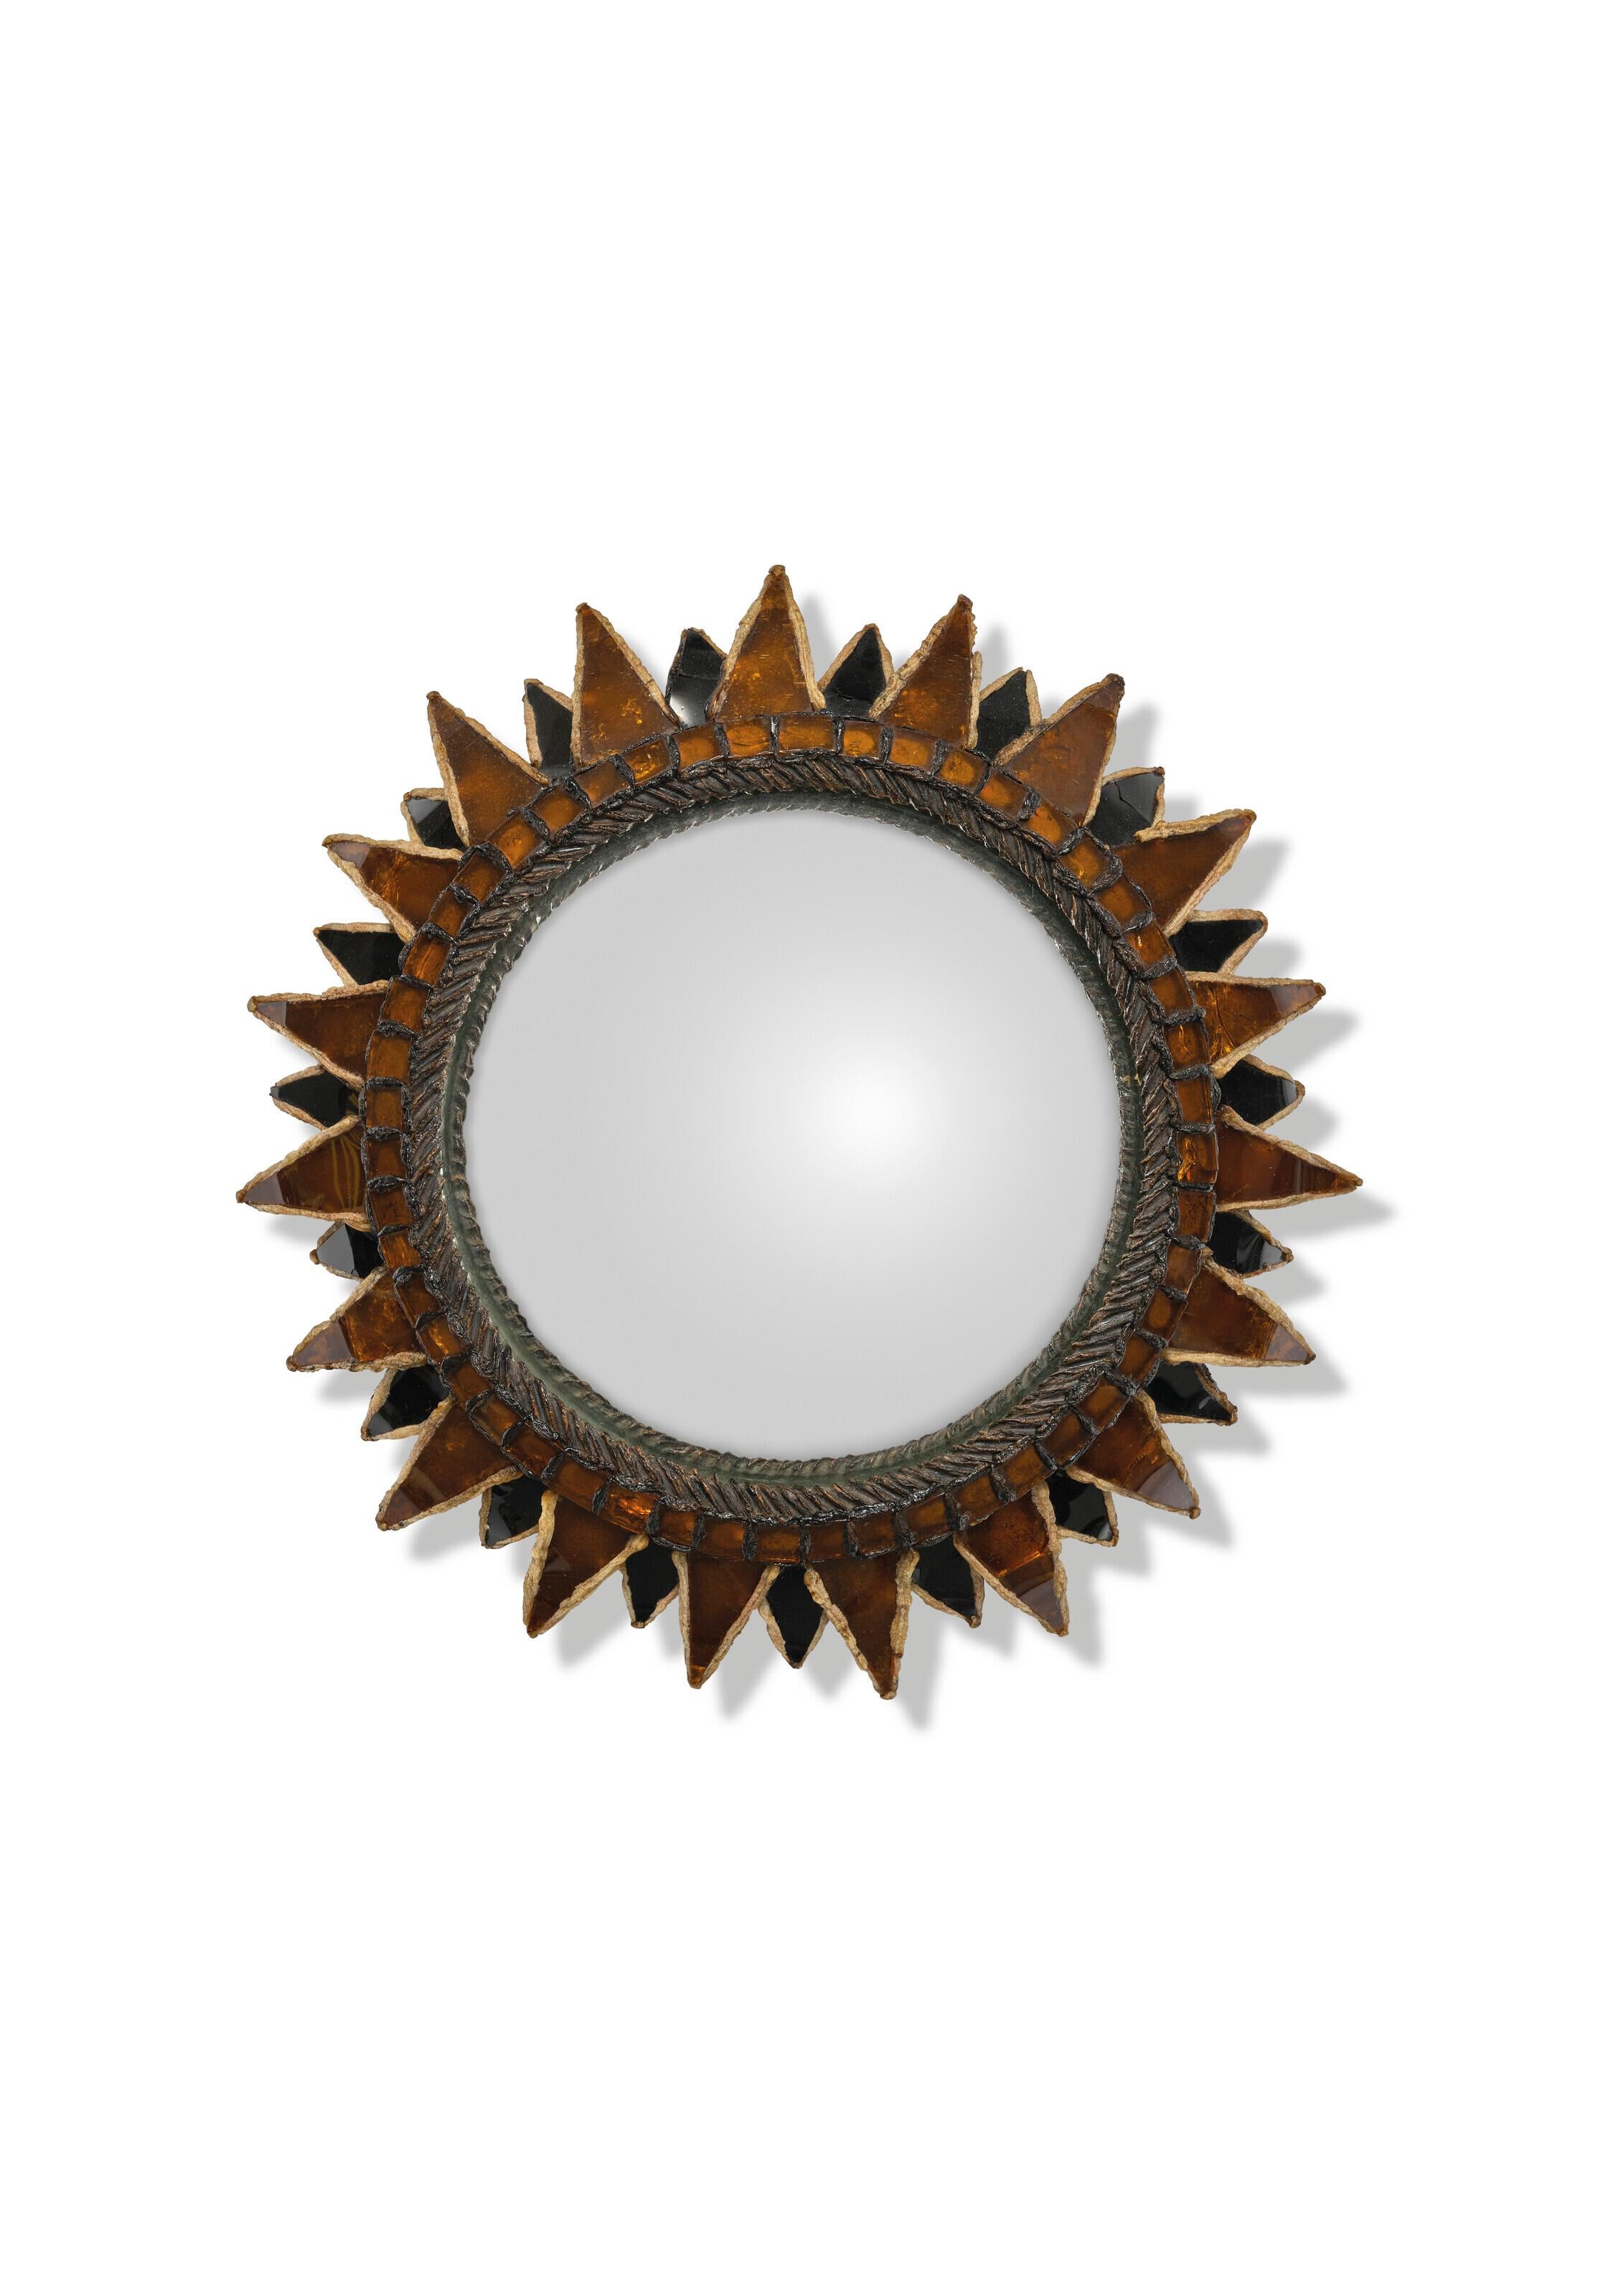 '60s 'Soleil à pointes n. 2' Mirror by Line Vautrin In Good Condition For Sale In Paris, FR